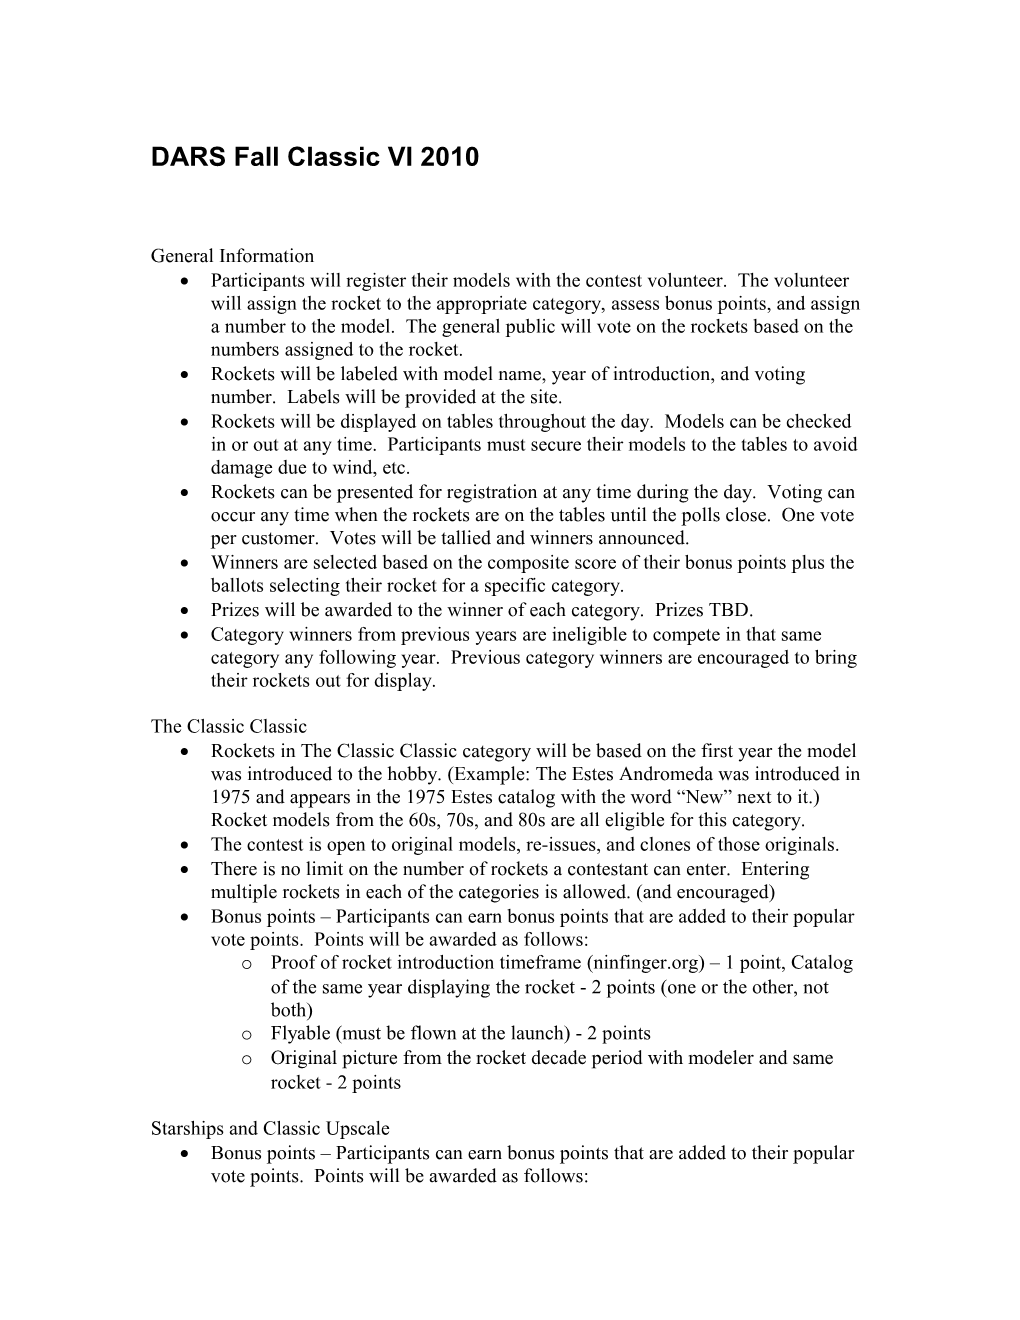 Rules, Operating Procedures and Events for the DARS Fall Classic